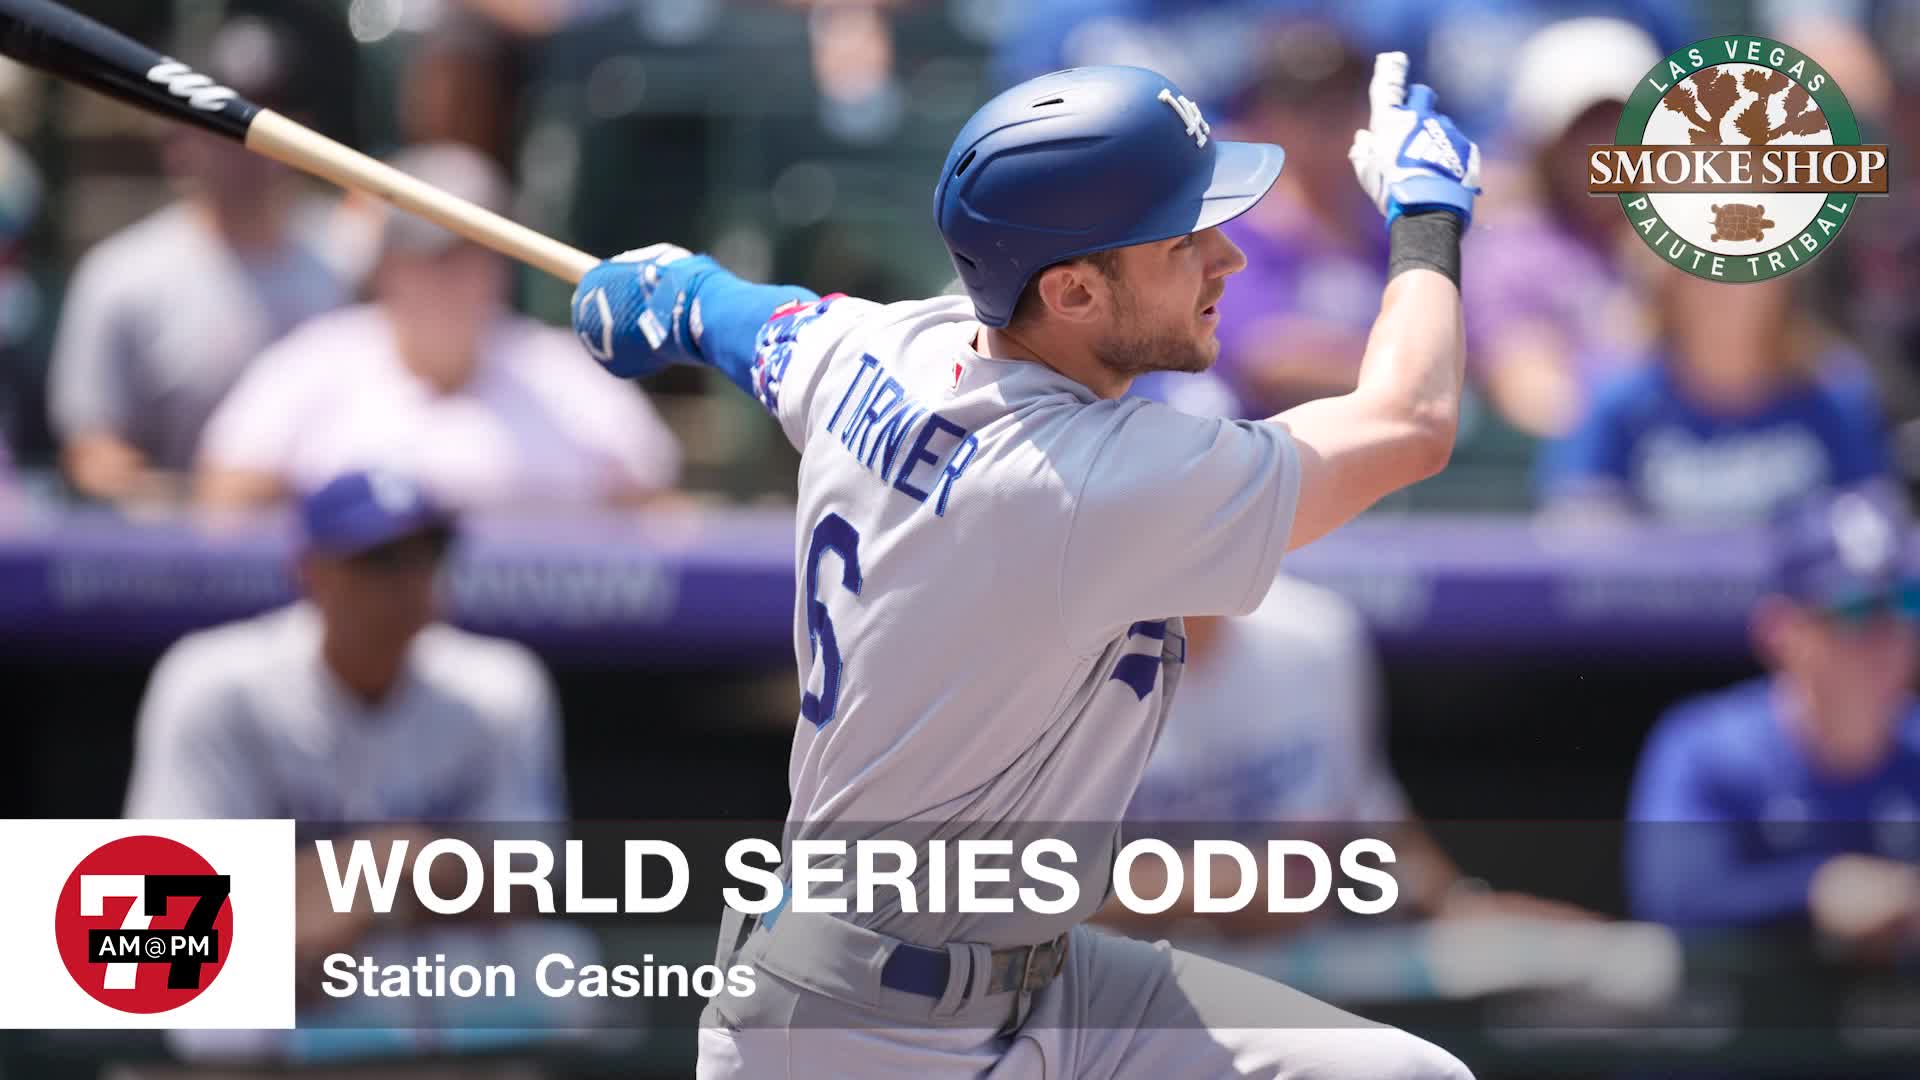 Los Angeles Dodgers and New York Yankees tied in Station Casino Sportbooks odds